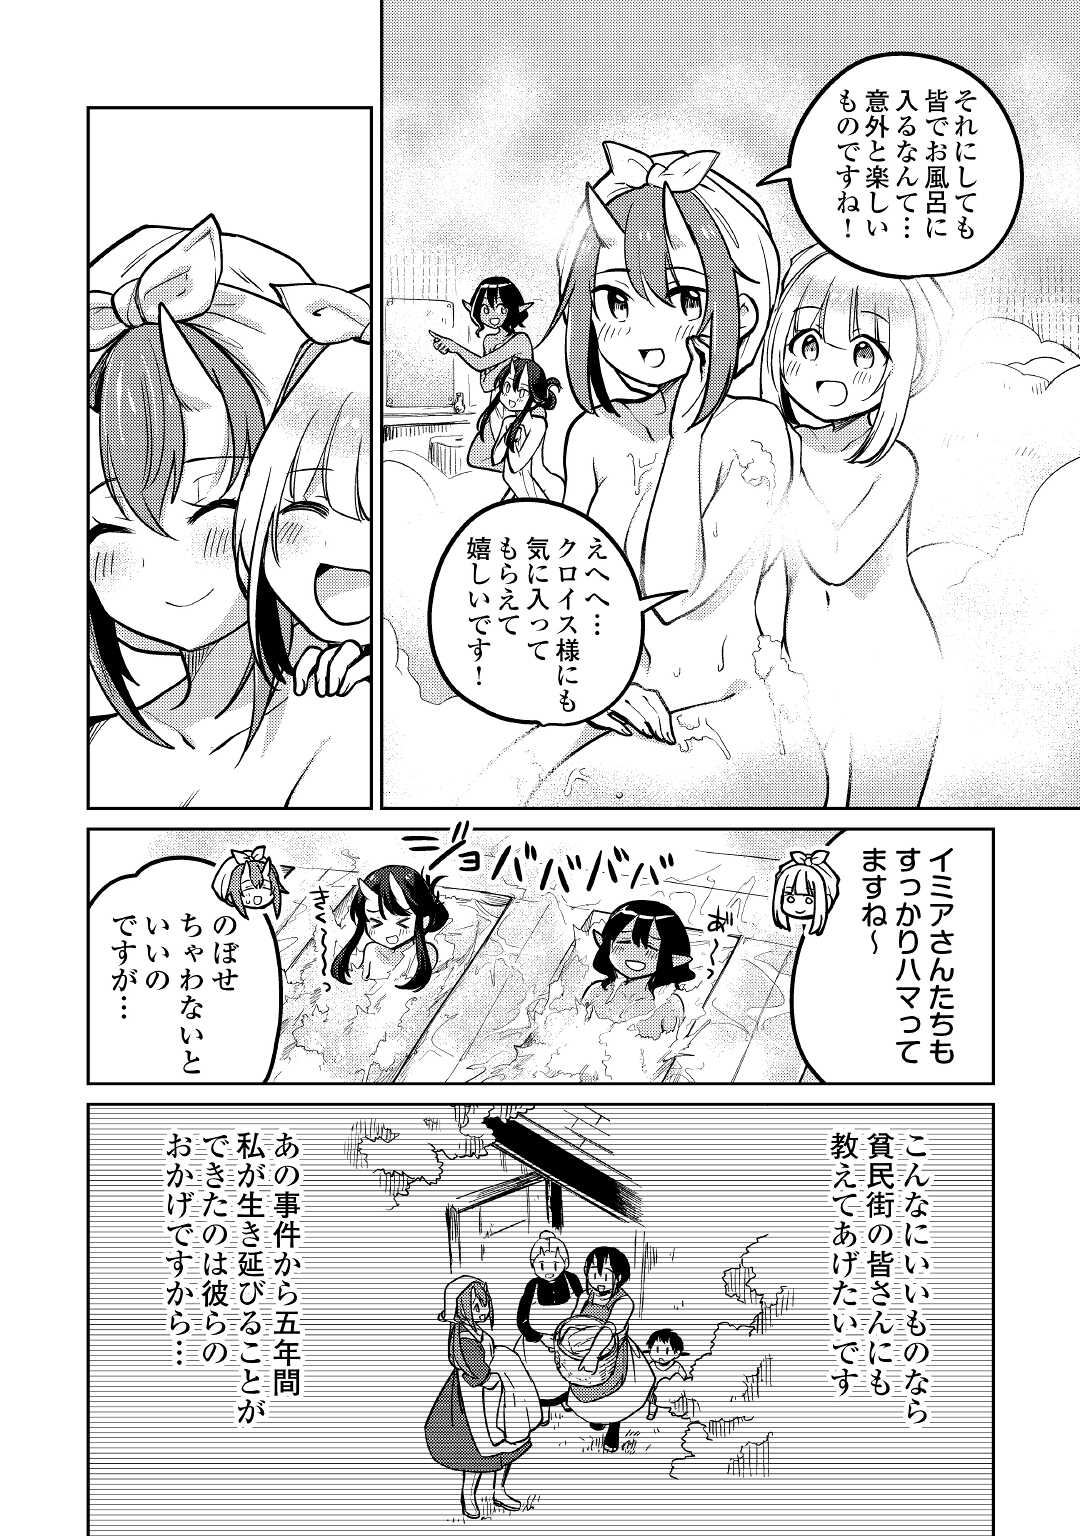 The Former Structural Researcher’s Story of Otherworldly Adventure 第41話 - Page 4